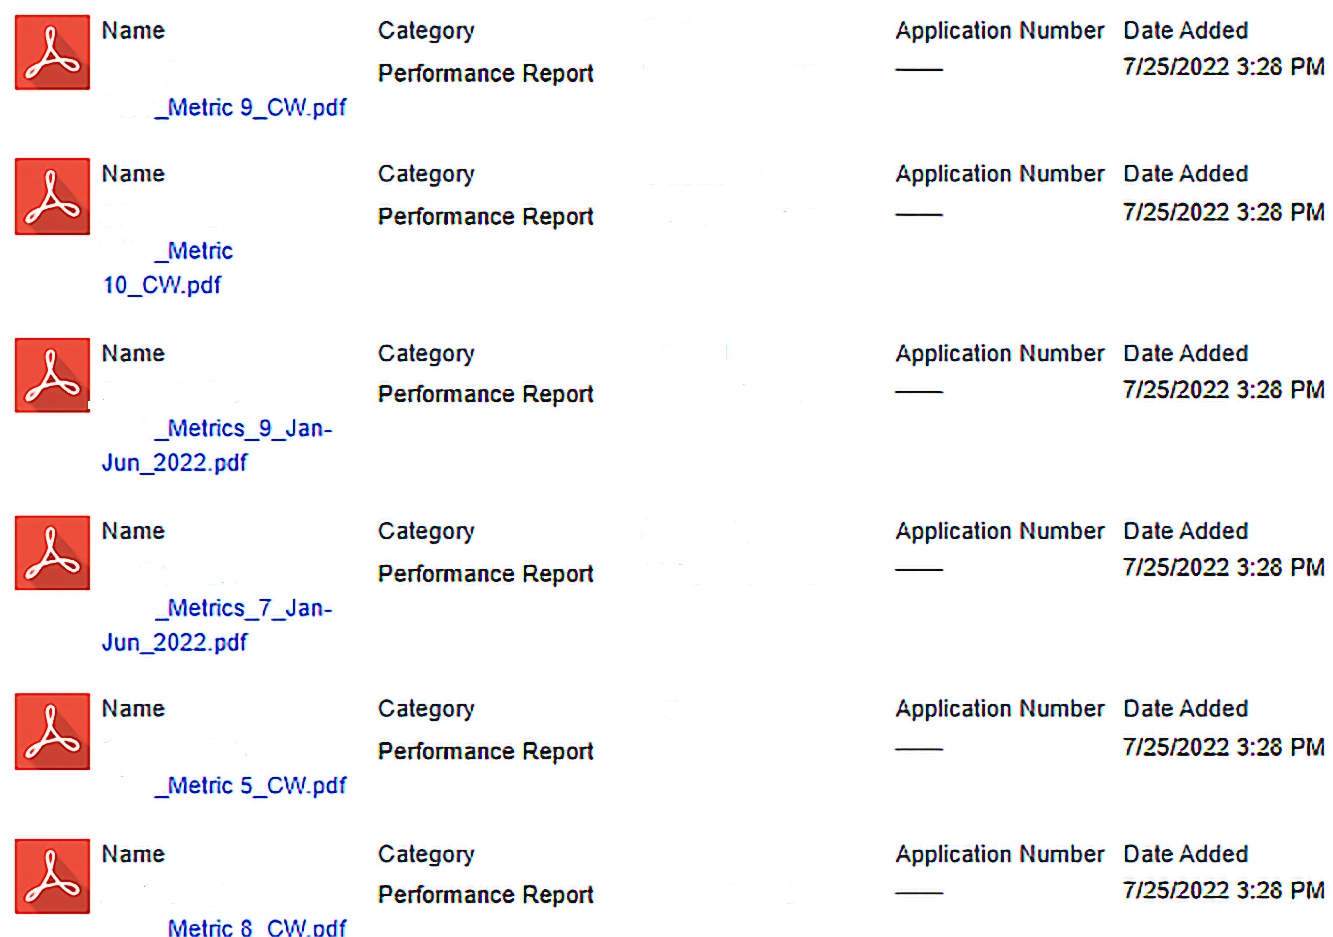 Example of CEBR performance report submissions